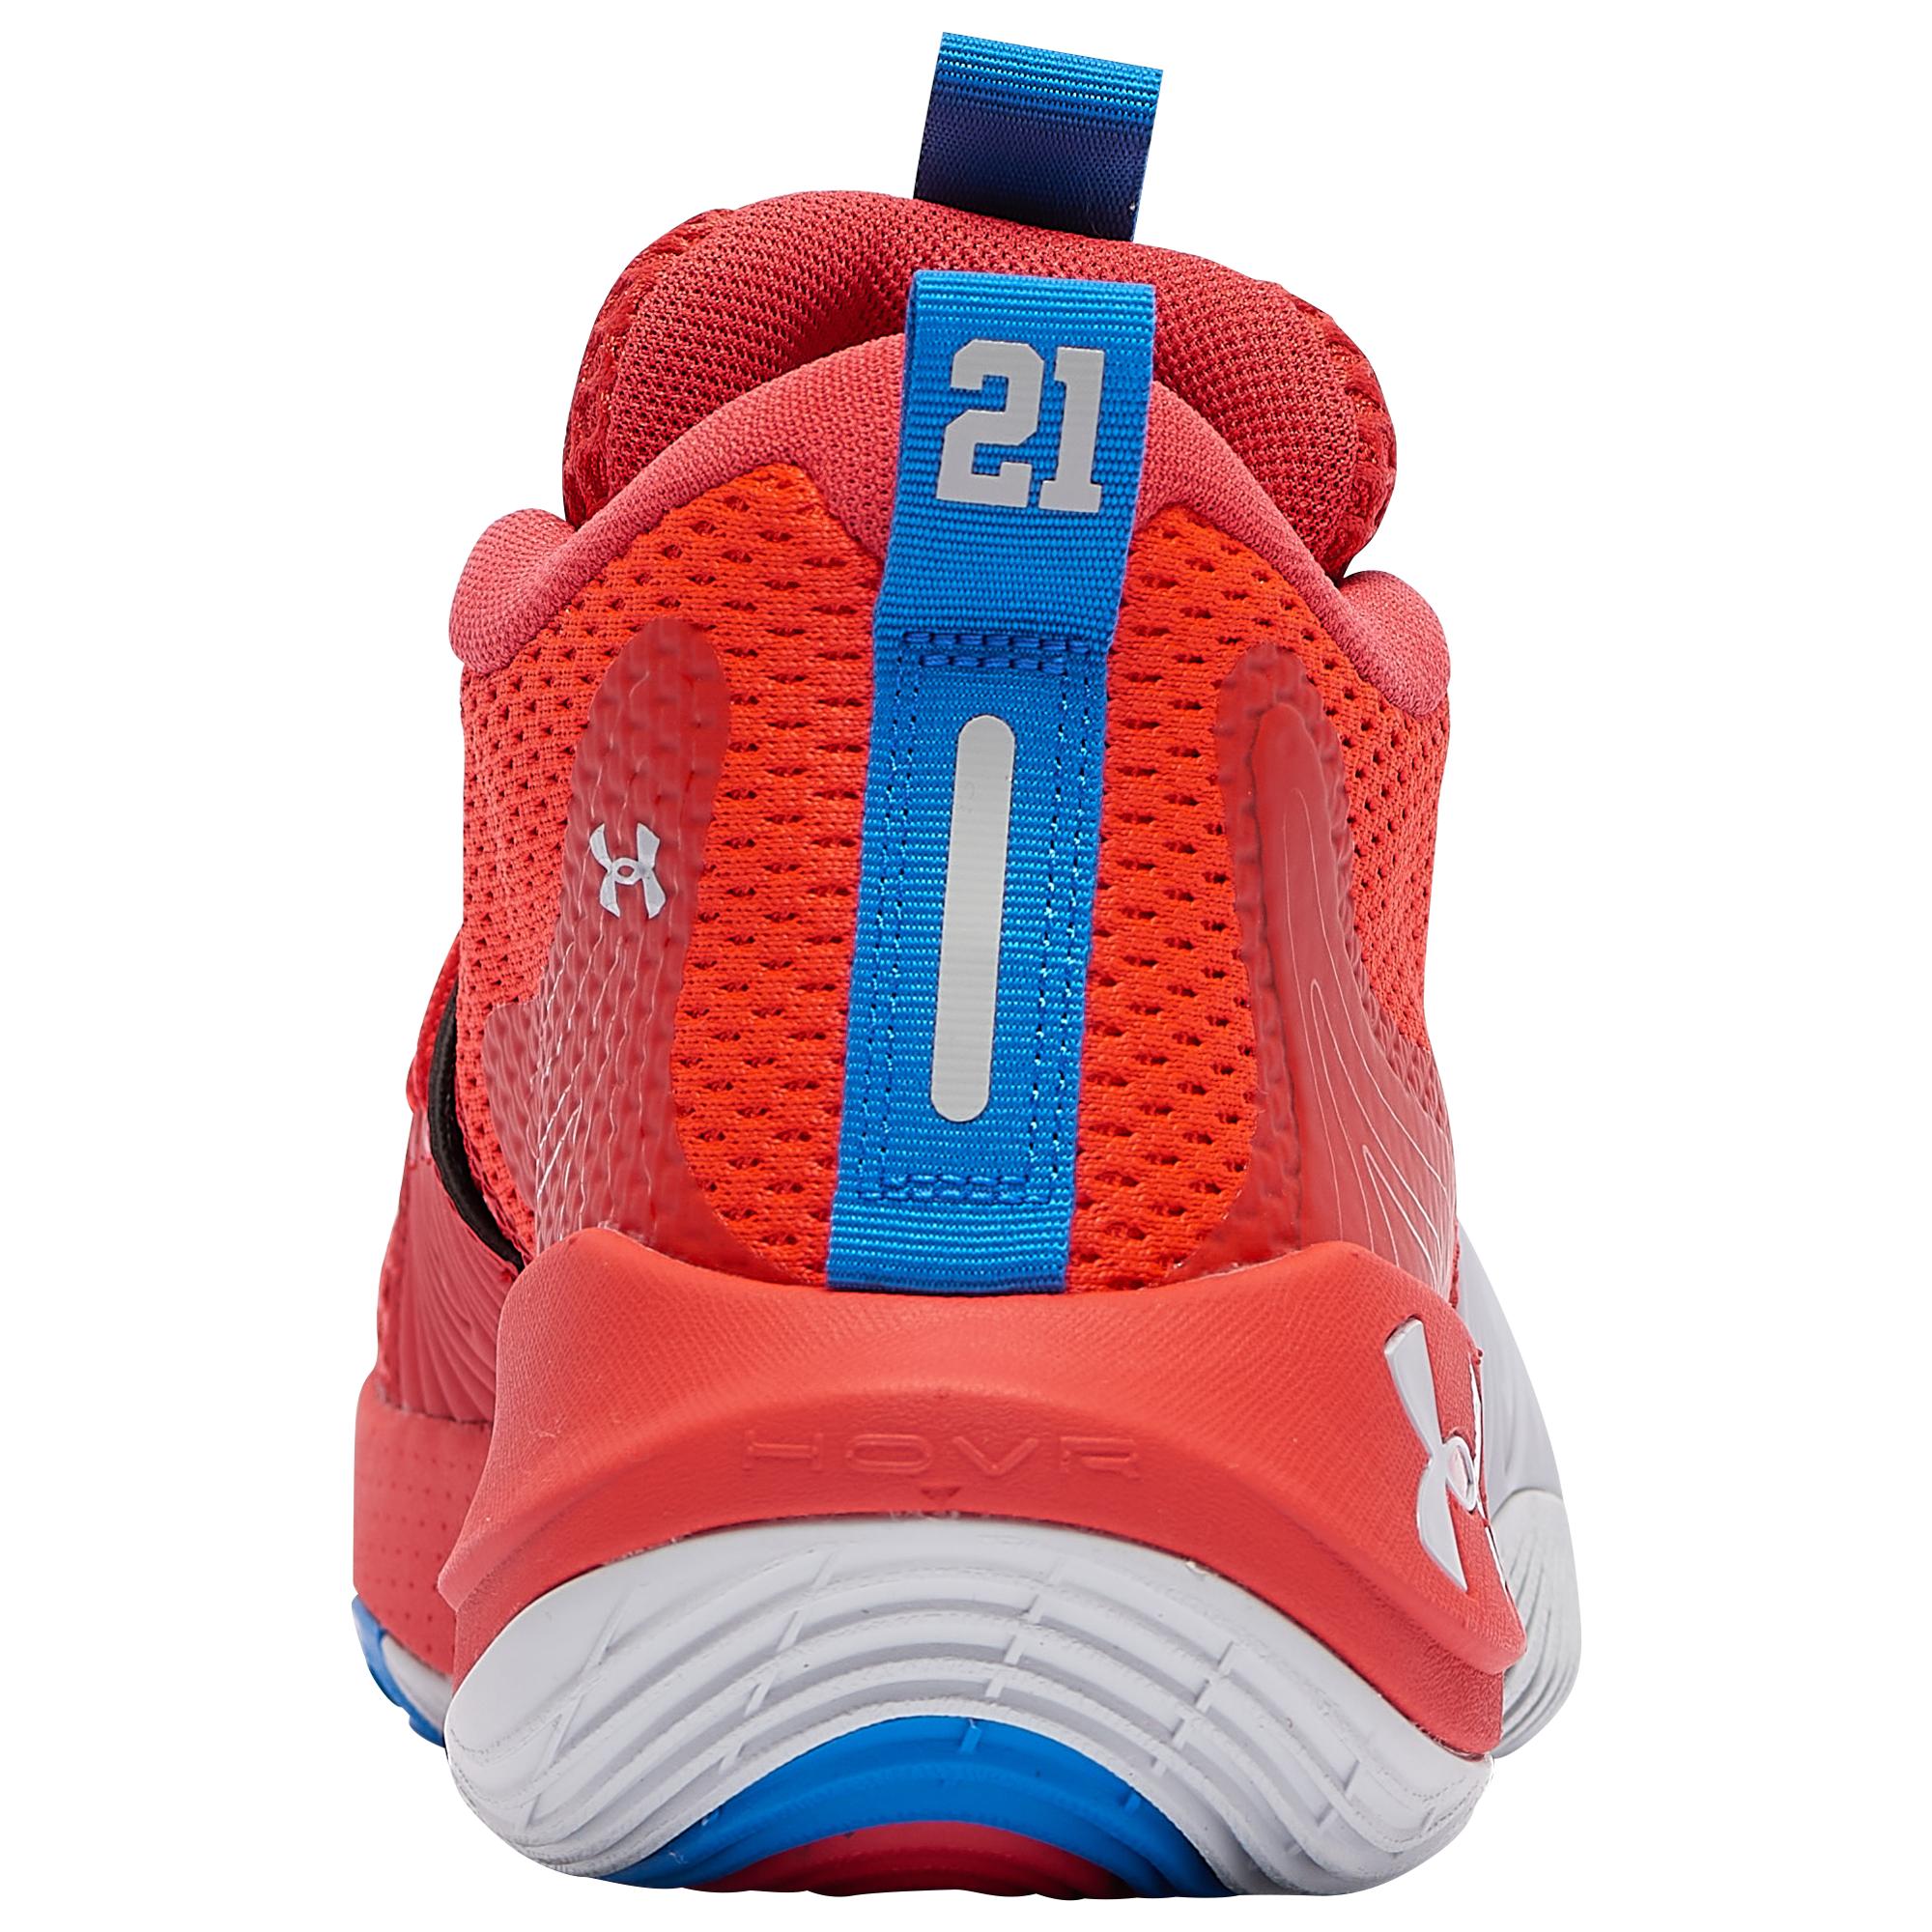 Under Armour Joel Embiid Embiid One Basketball Shoes in